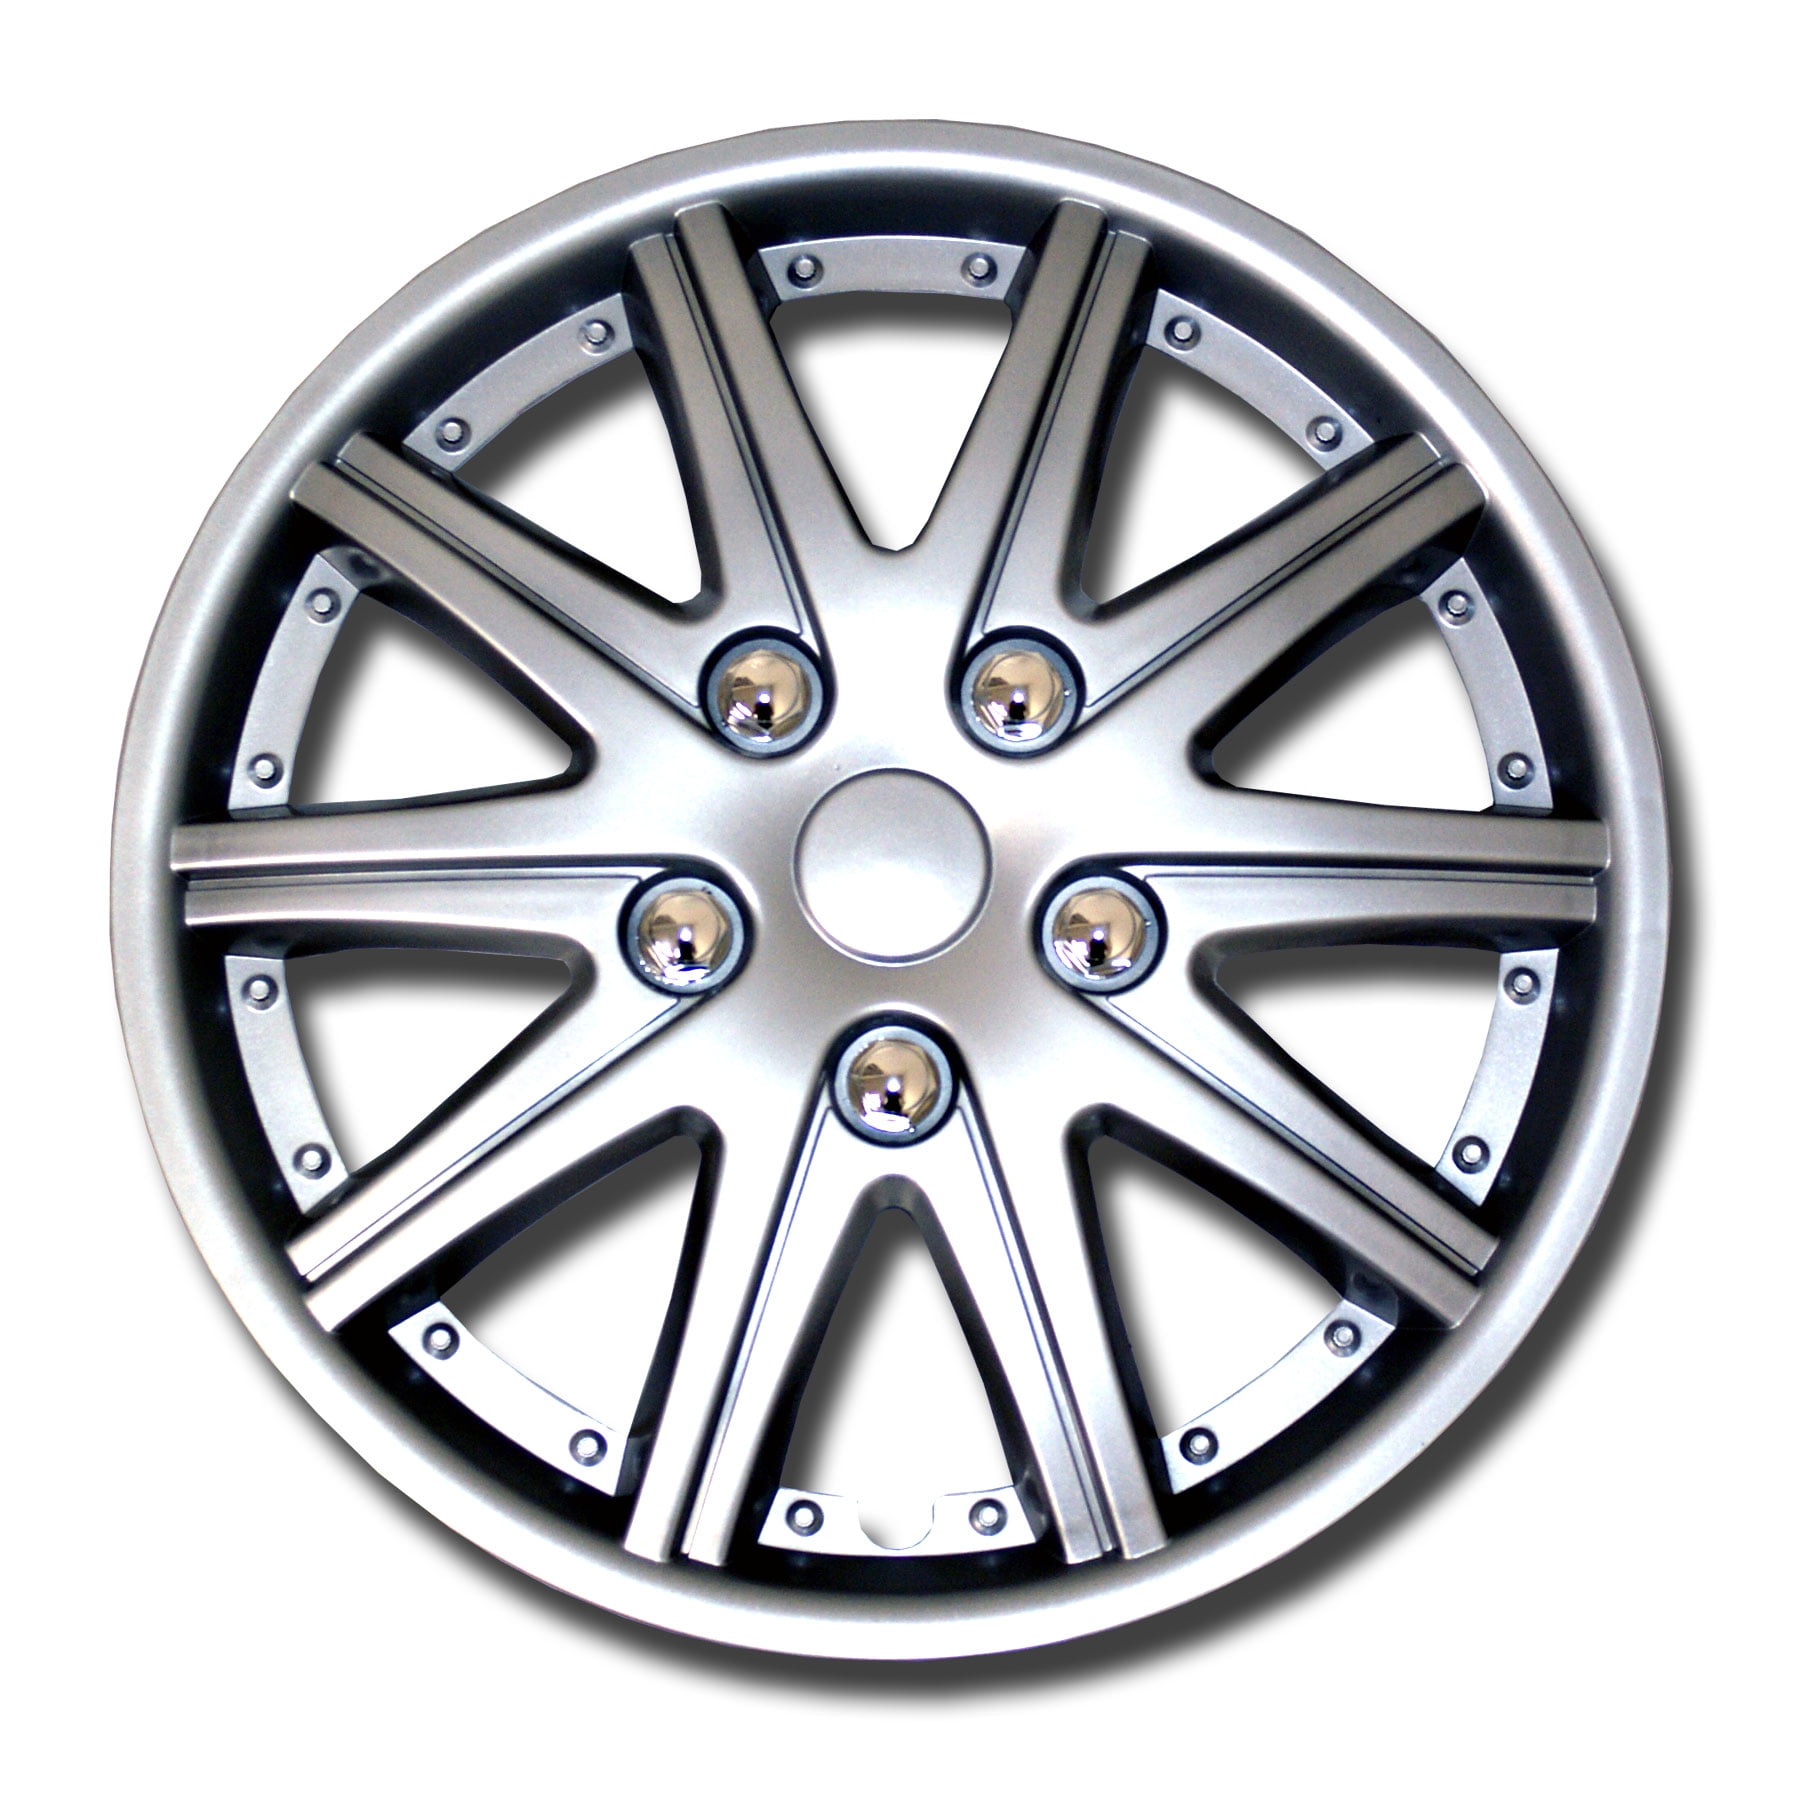 TuningPros WSC3-026S15 4pcs Set Snap-On Type Pop-On 15-Inches Metallic Silver Hubcaps Wheel Cover 